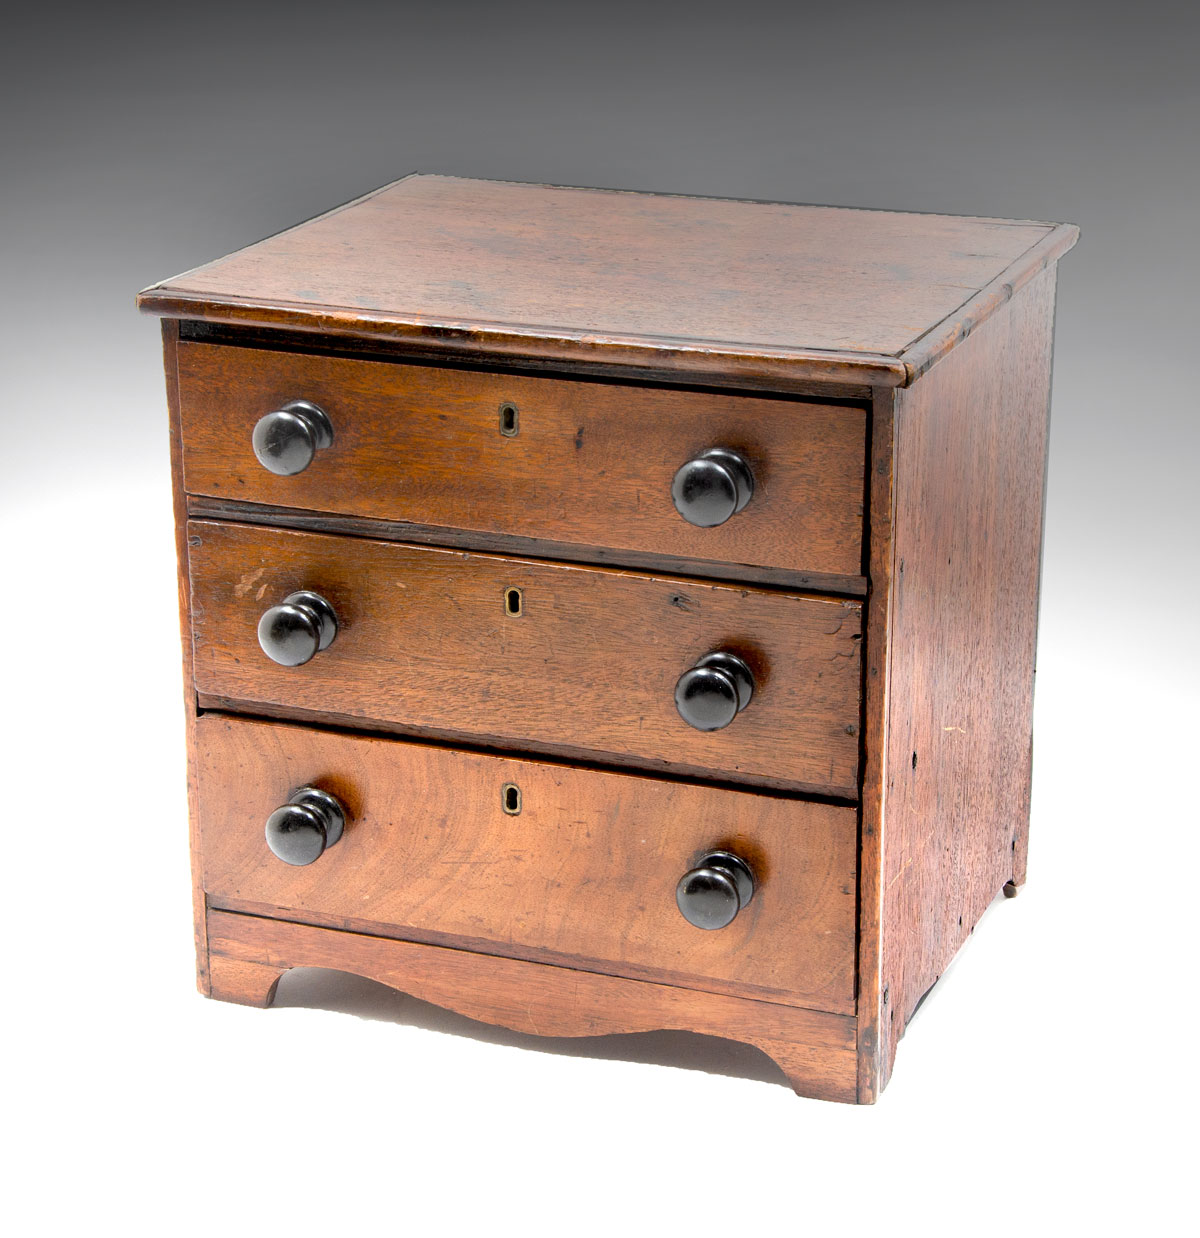 EARLY 19TH C. 3- DRAWER MINIATURE